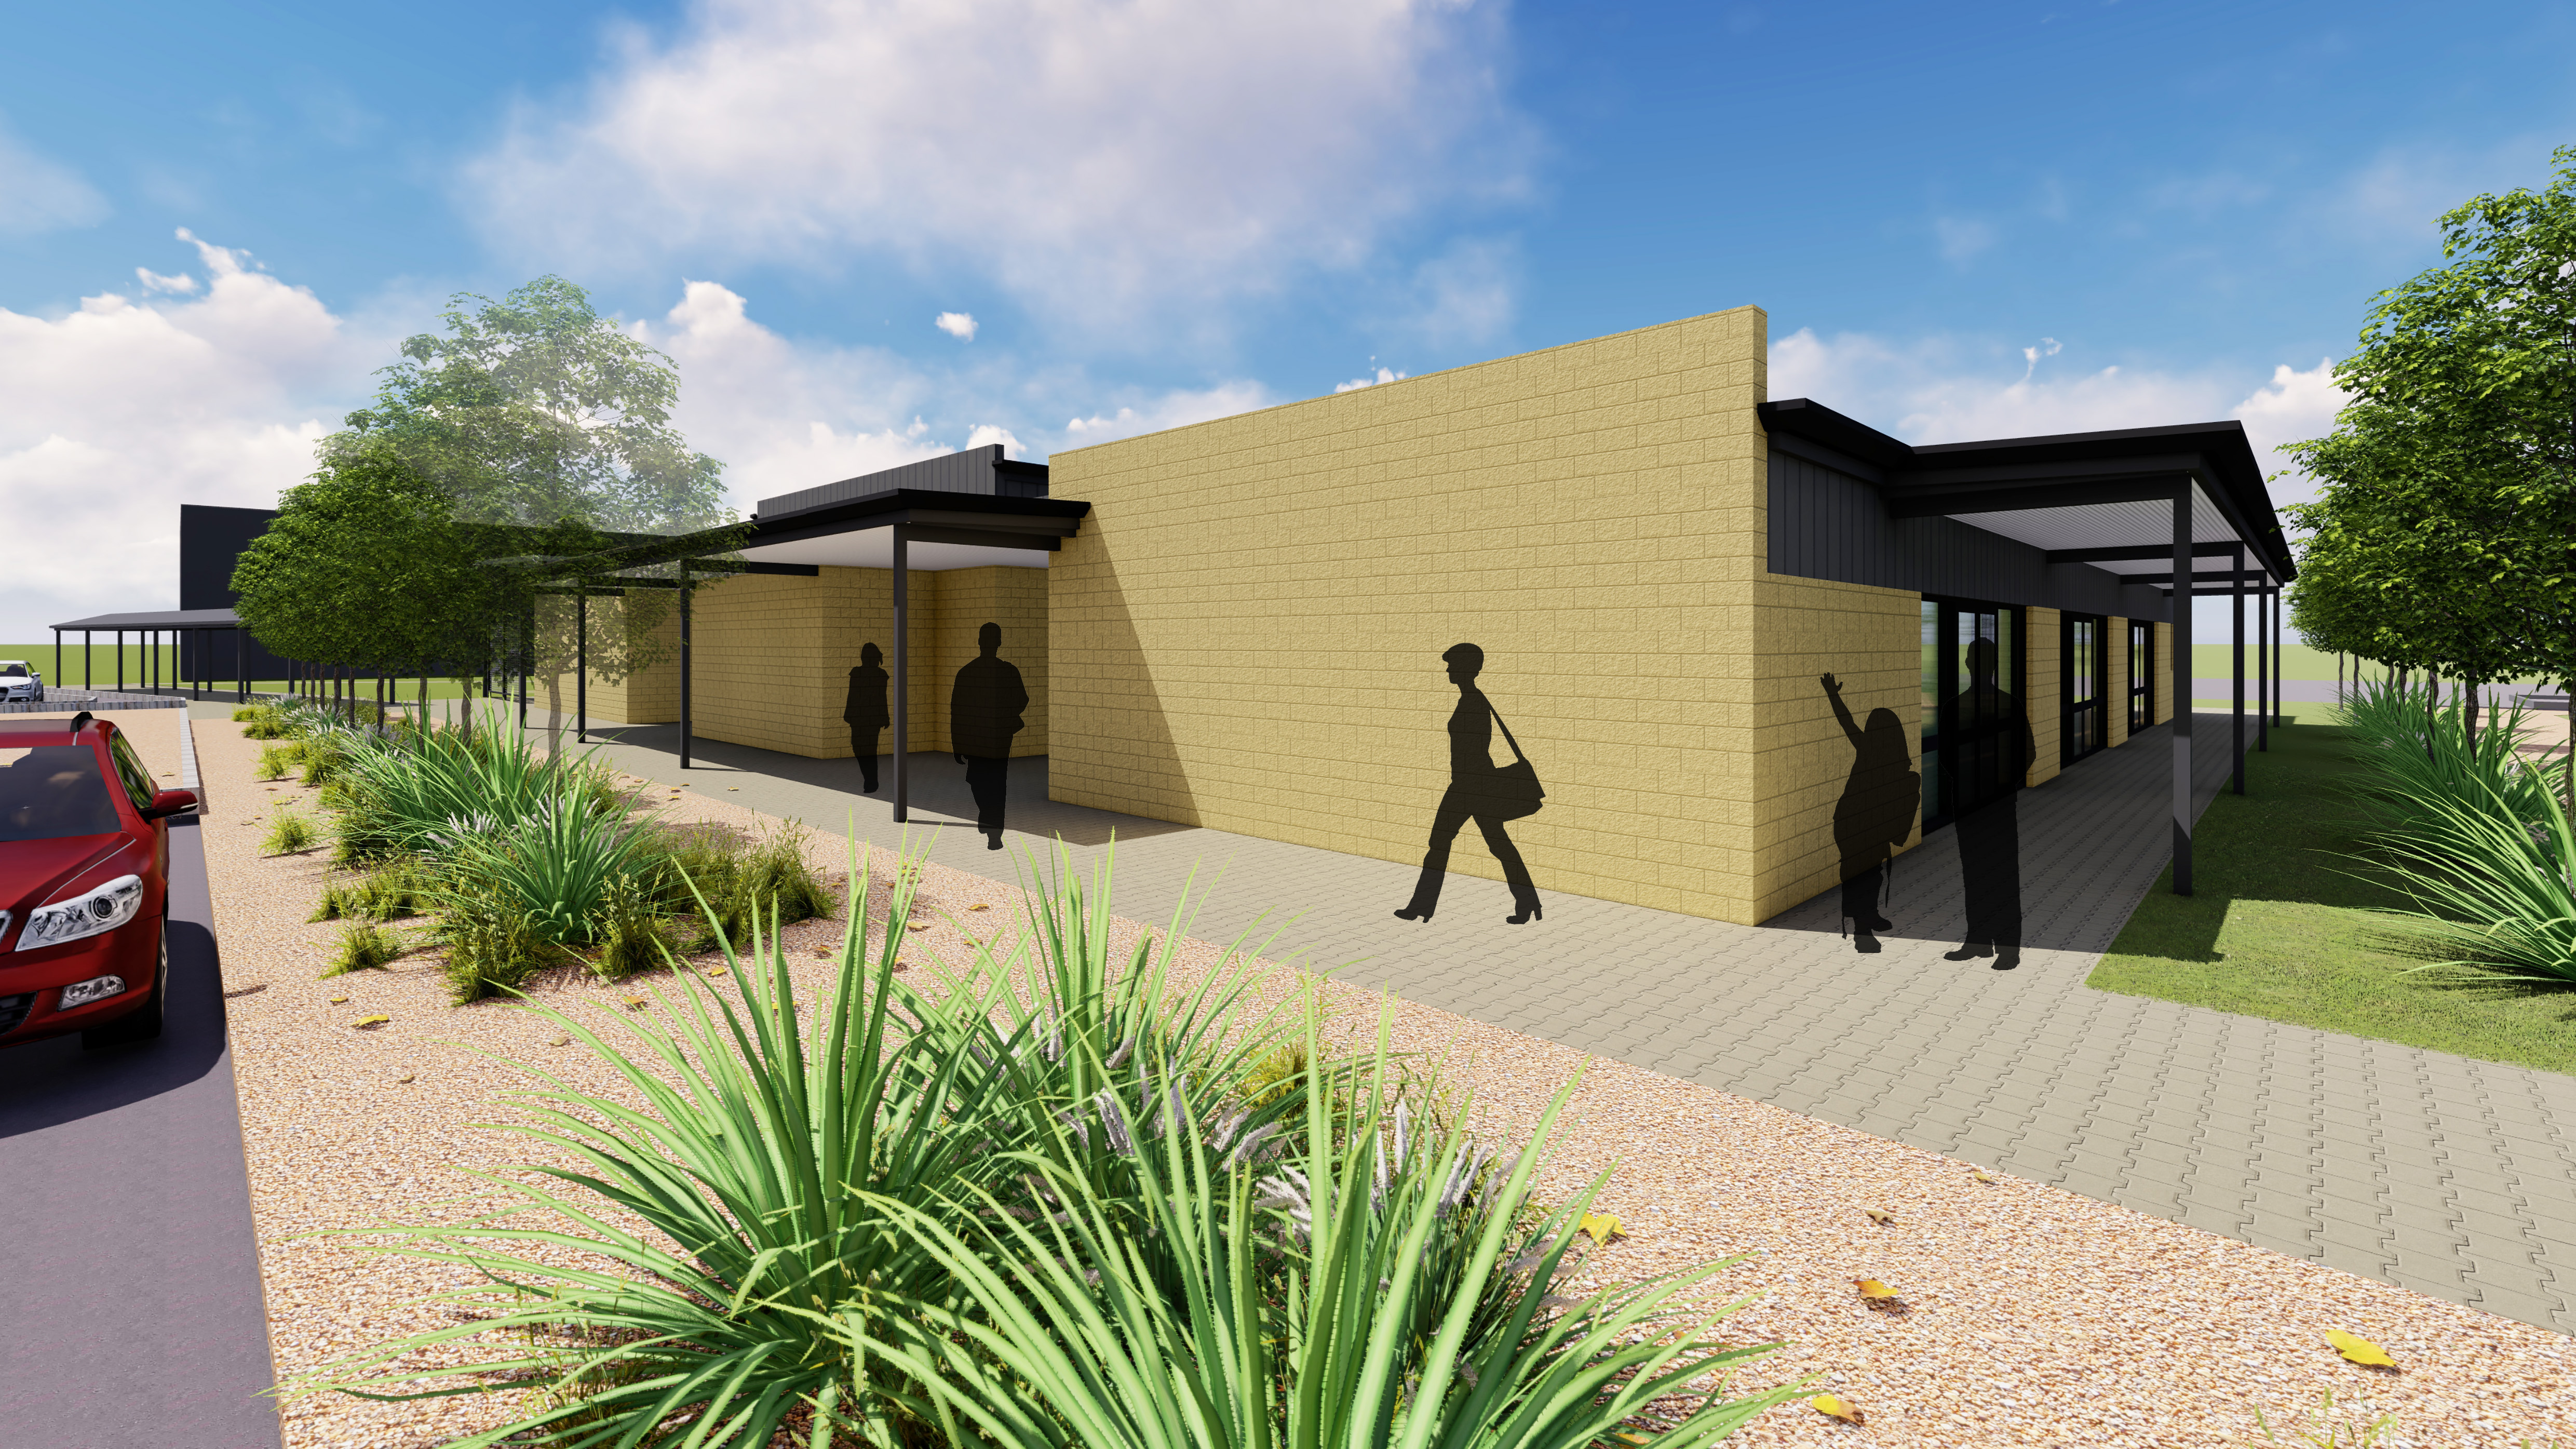 A 3D concept image of a new school building it features brick walls, surrounding trees and lots of verandas.